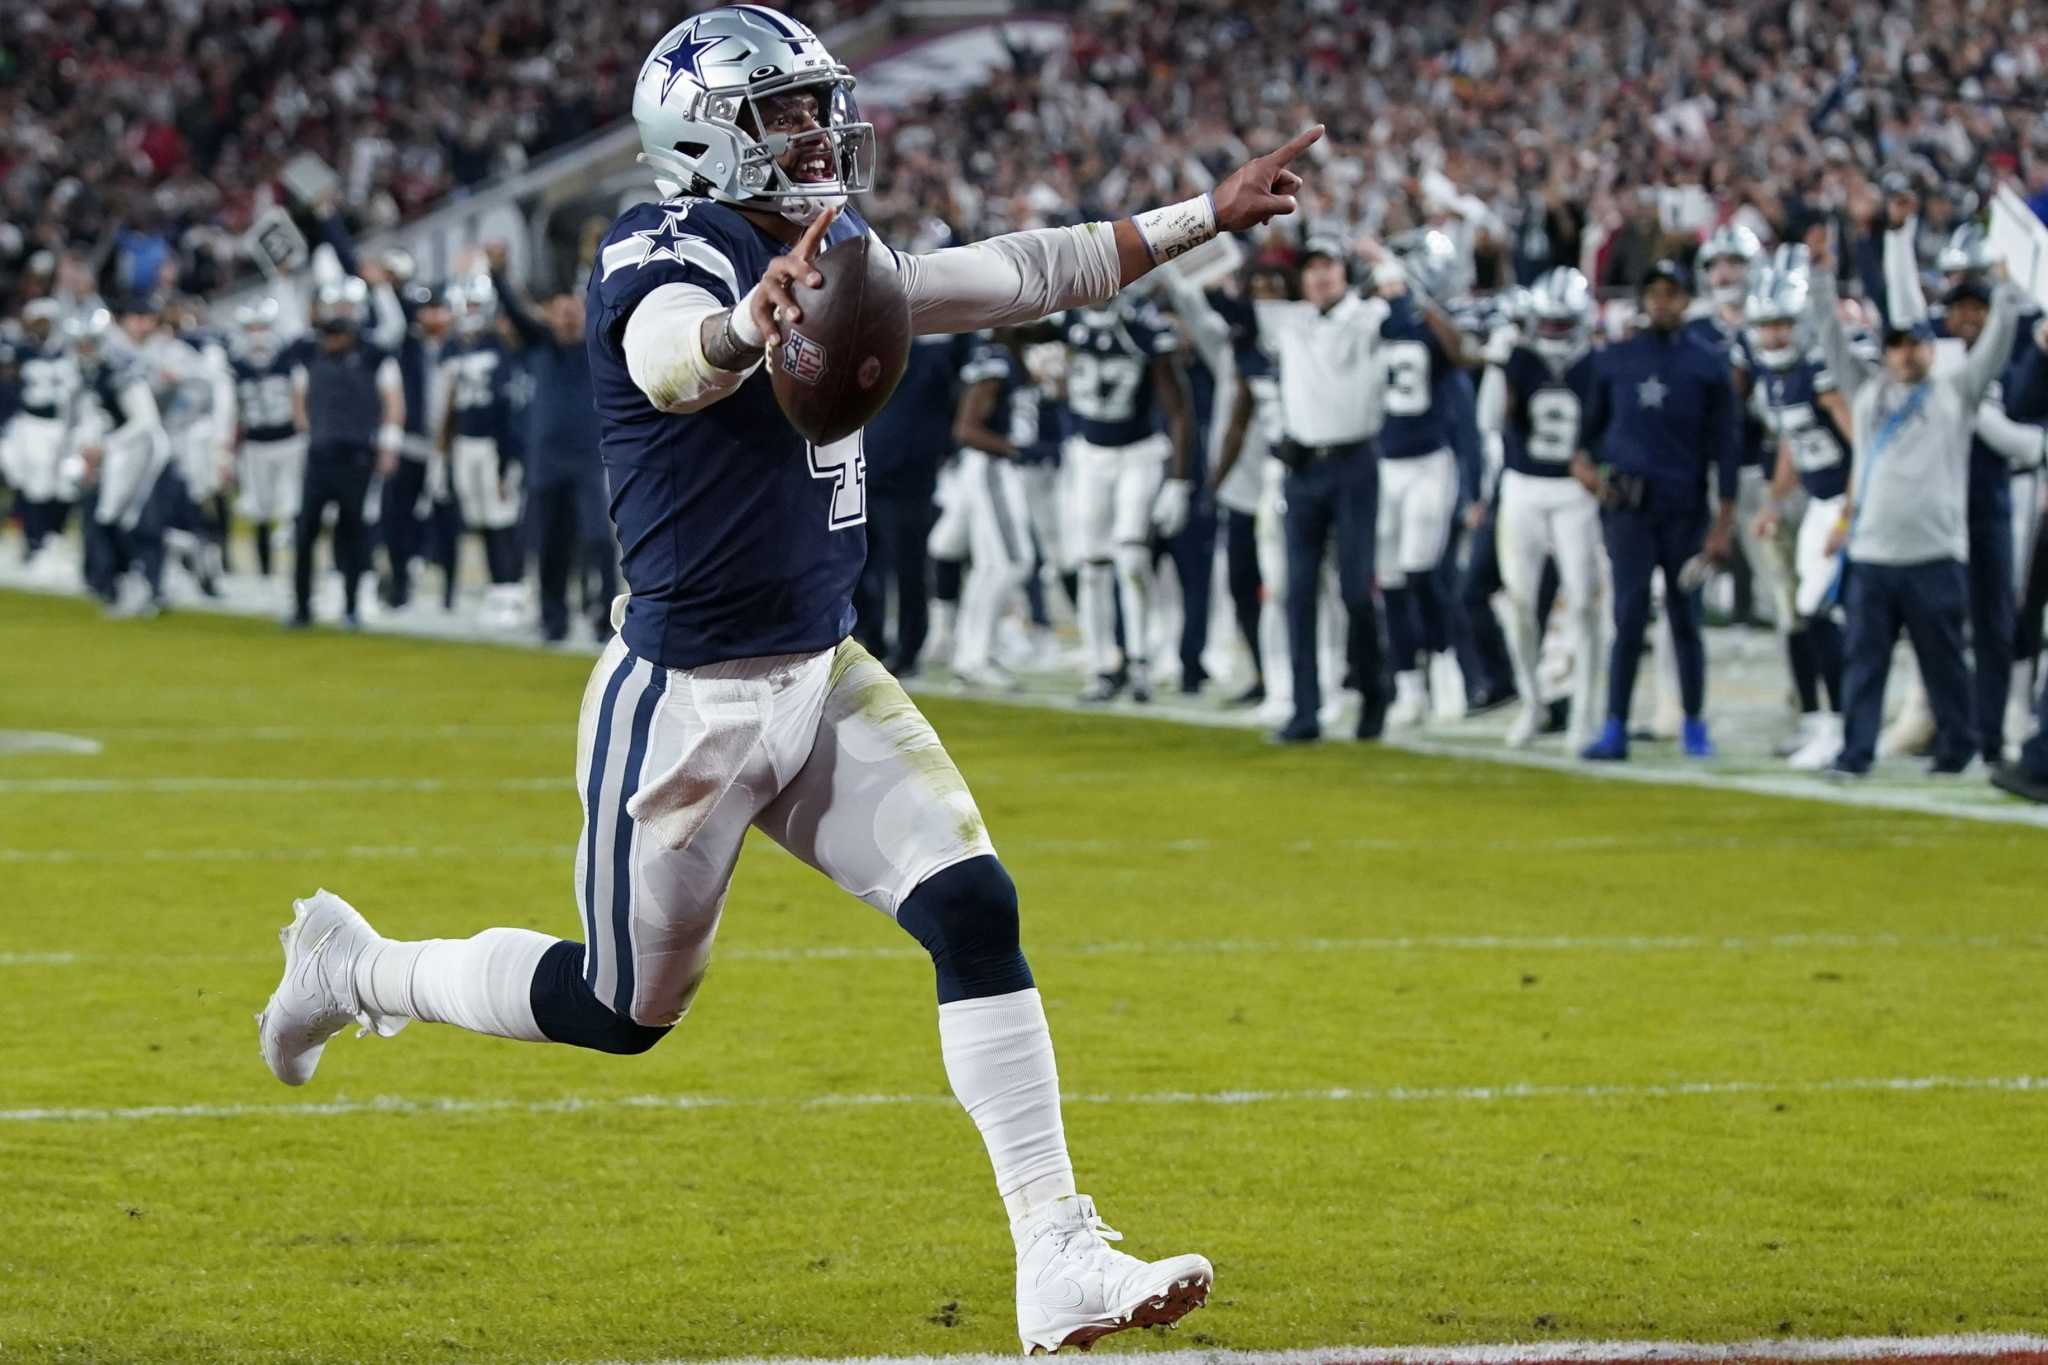 Only mobile QBs have beaten 49ers and here comes the Cowboys' Dak